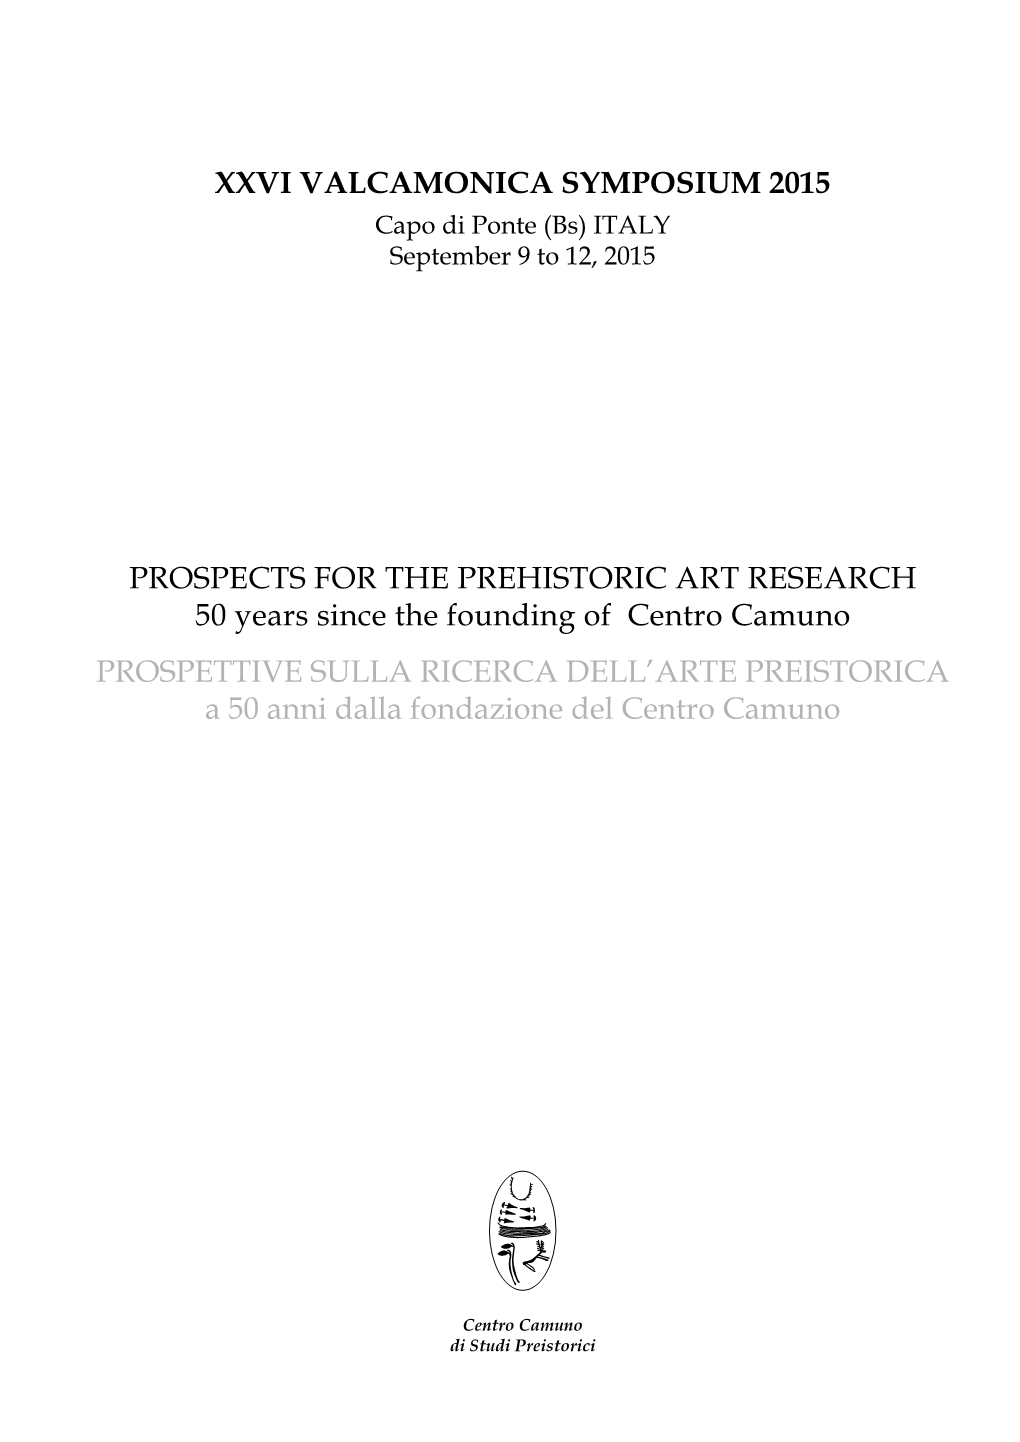 Prospects for the Prehistoric Art Research